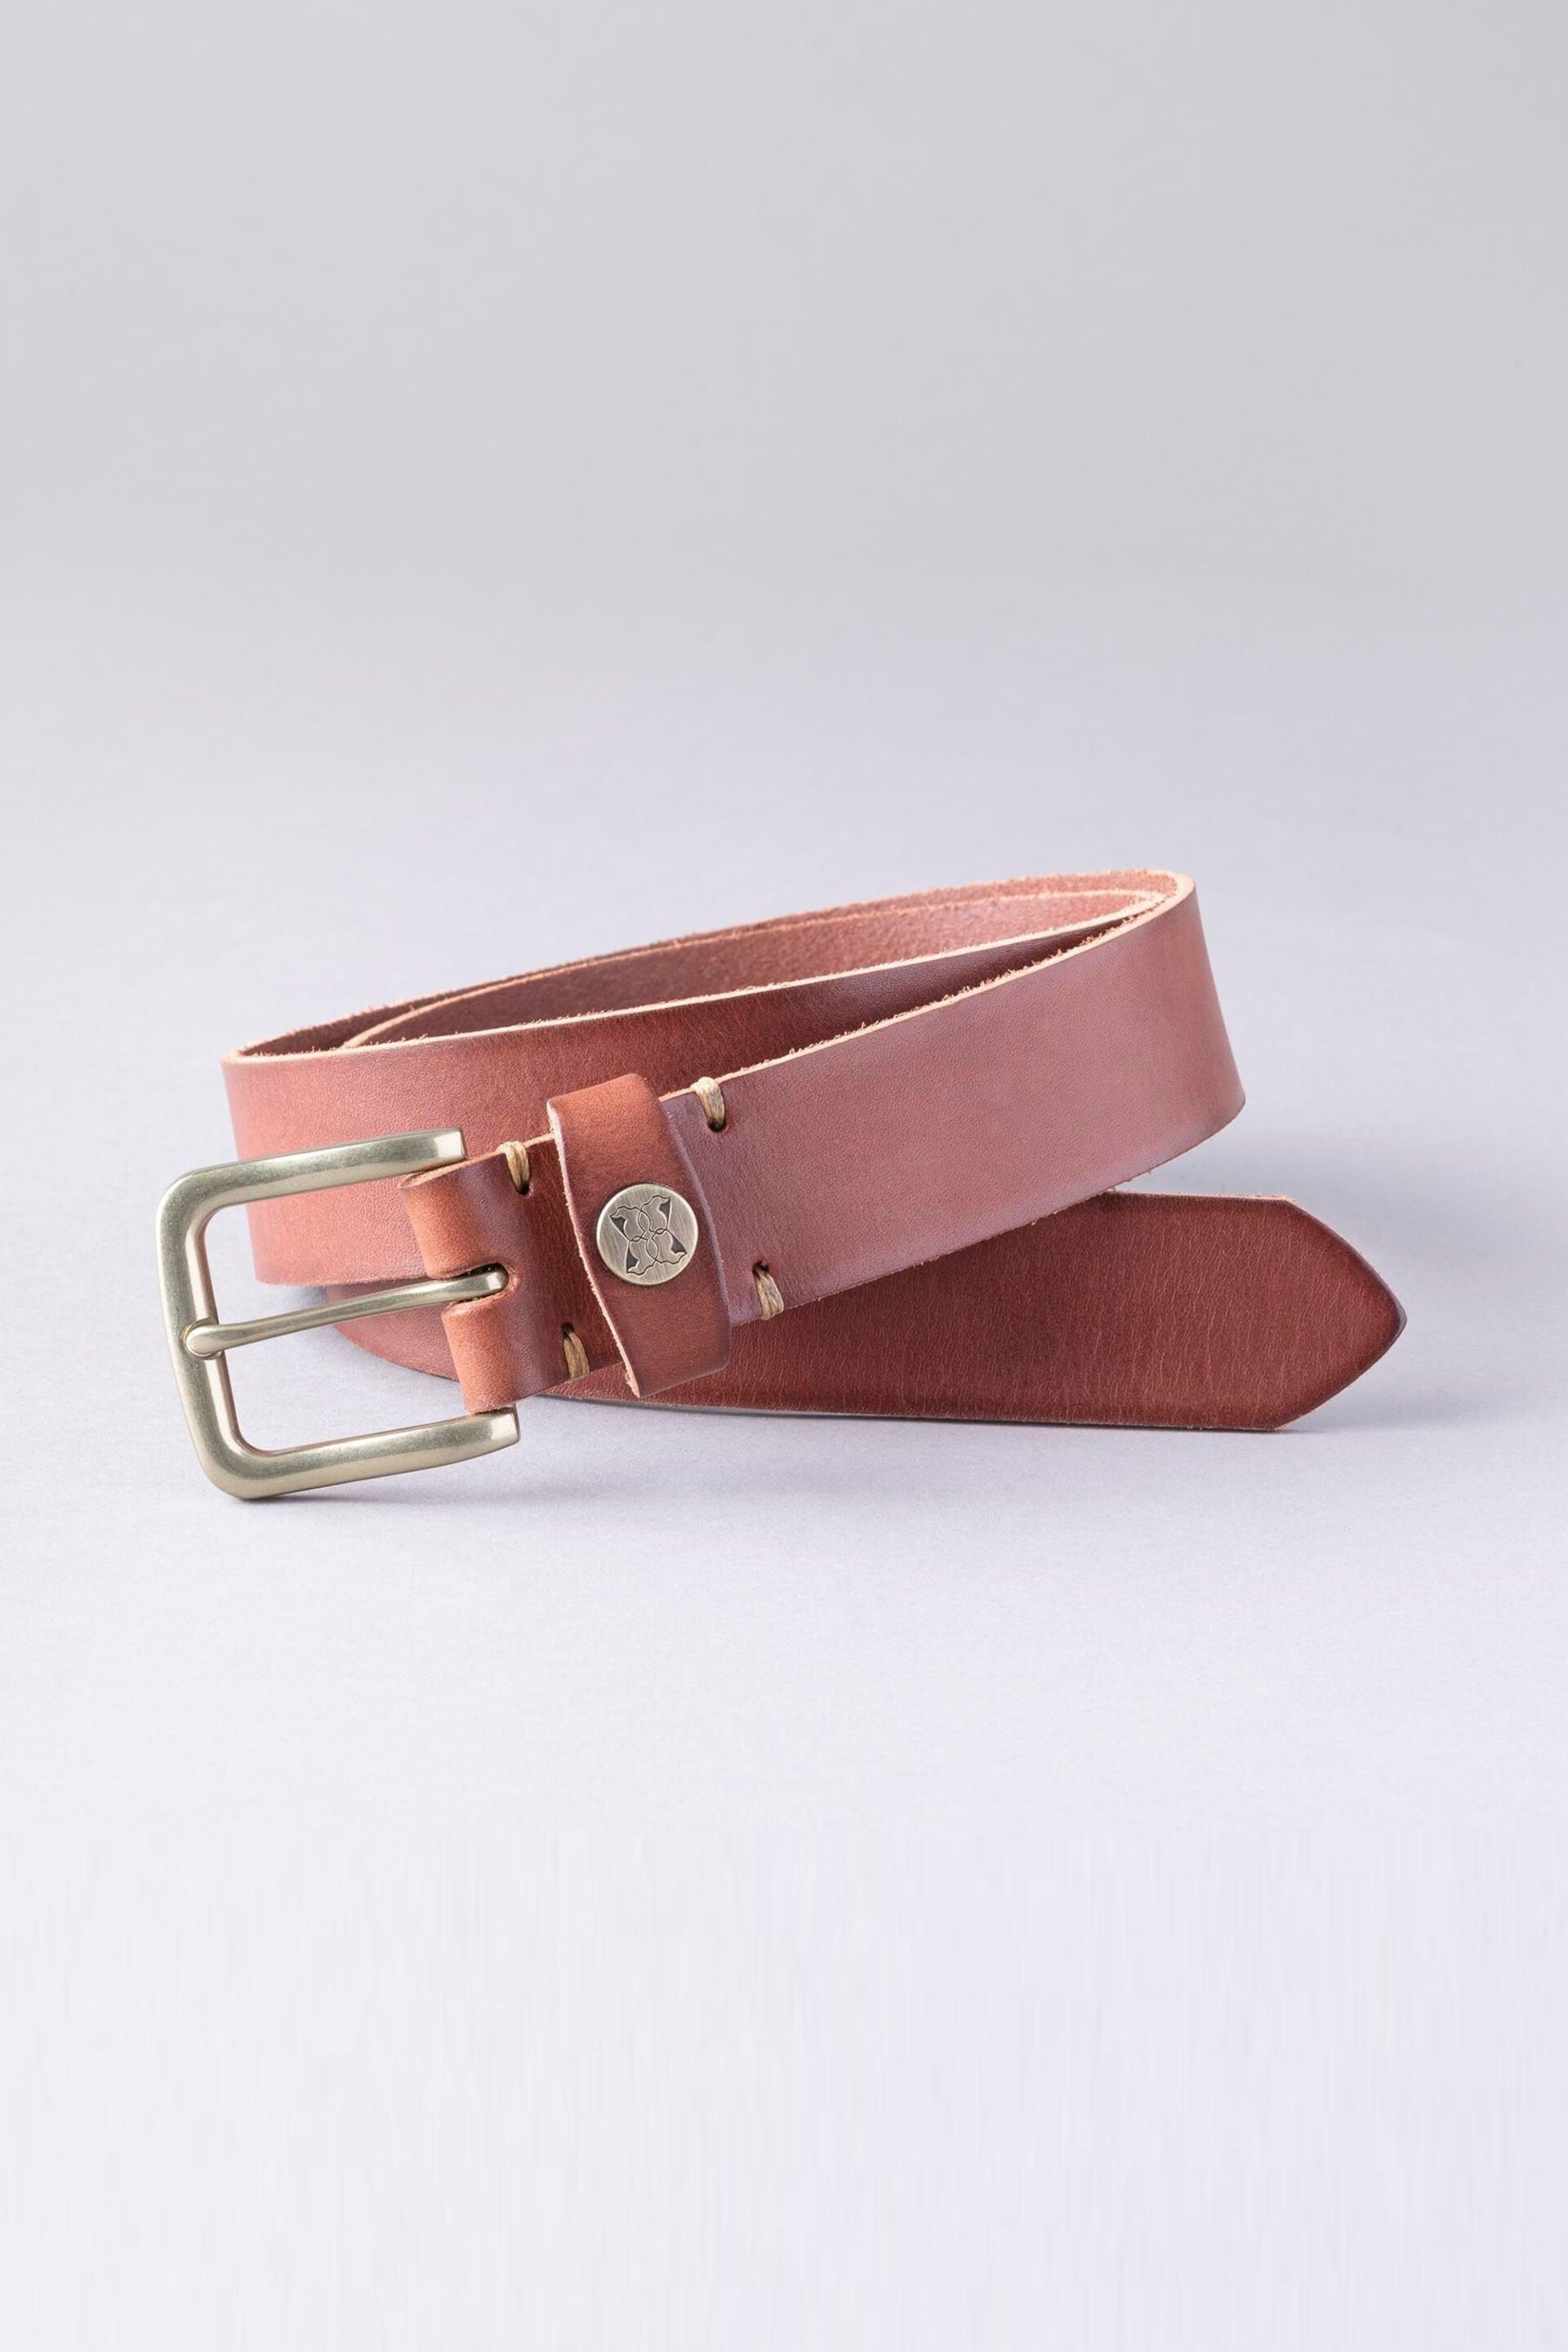 Lakeland Leather Tan Brown Icon Leather Belt - Image 1 of 3